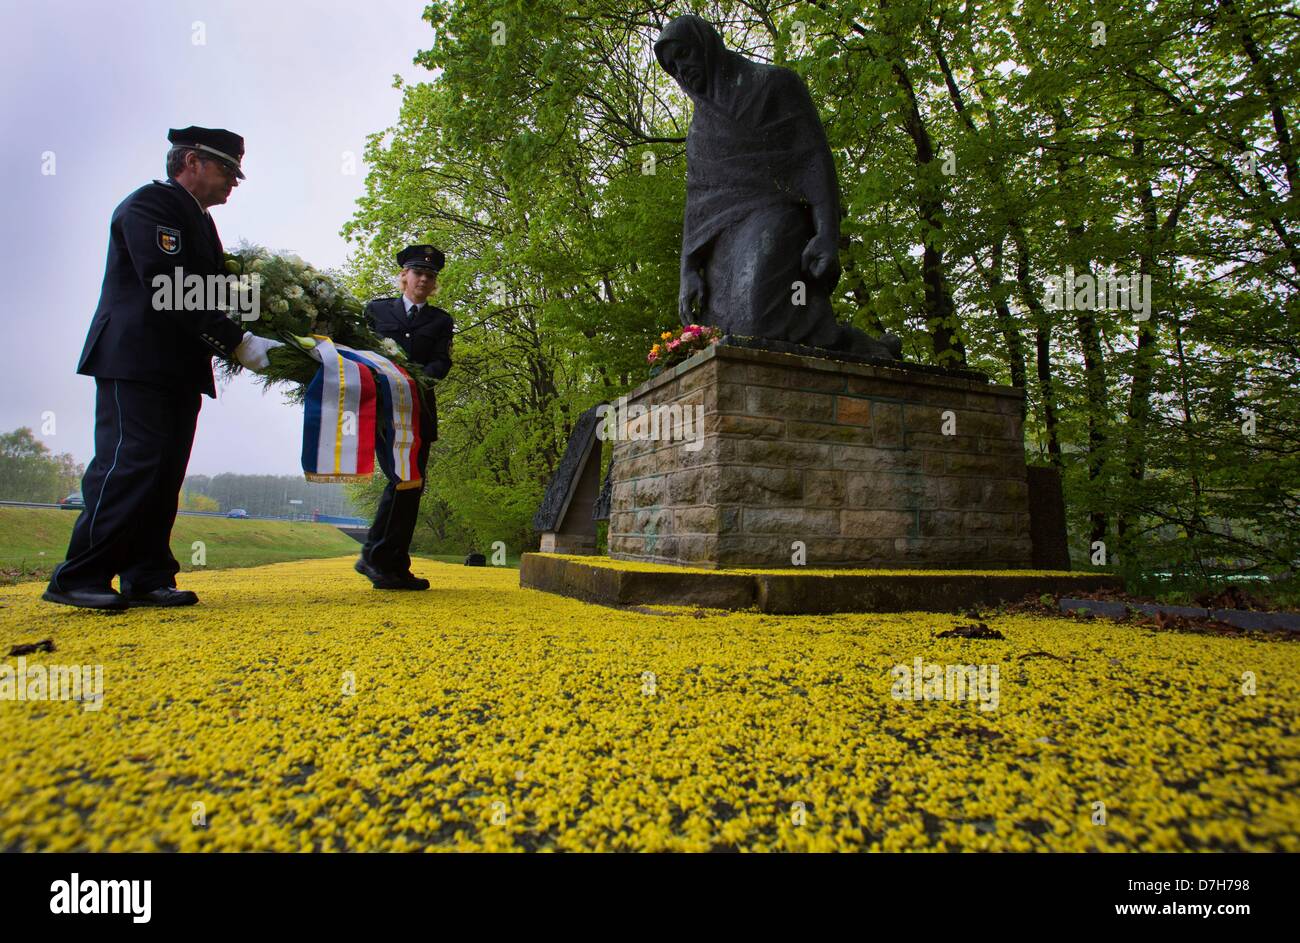 Police officers lay down a wreath at the memorial 'The Mother' to commemorate the end of World War II on 08 May 1945, in Raben-Steinfeld, Germany, 08 May 2013. Mecklenburg-Western Pomerania is the only German state which commits this day as official Remembrance Day. Photo: JENS BUETTNER Stock Photo